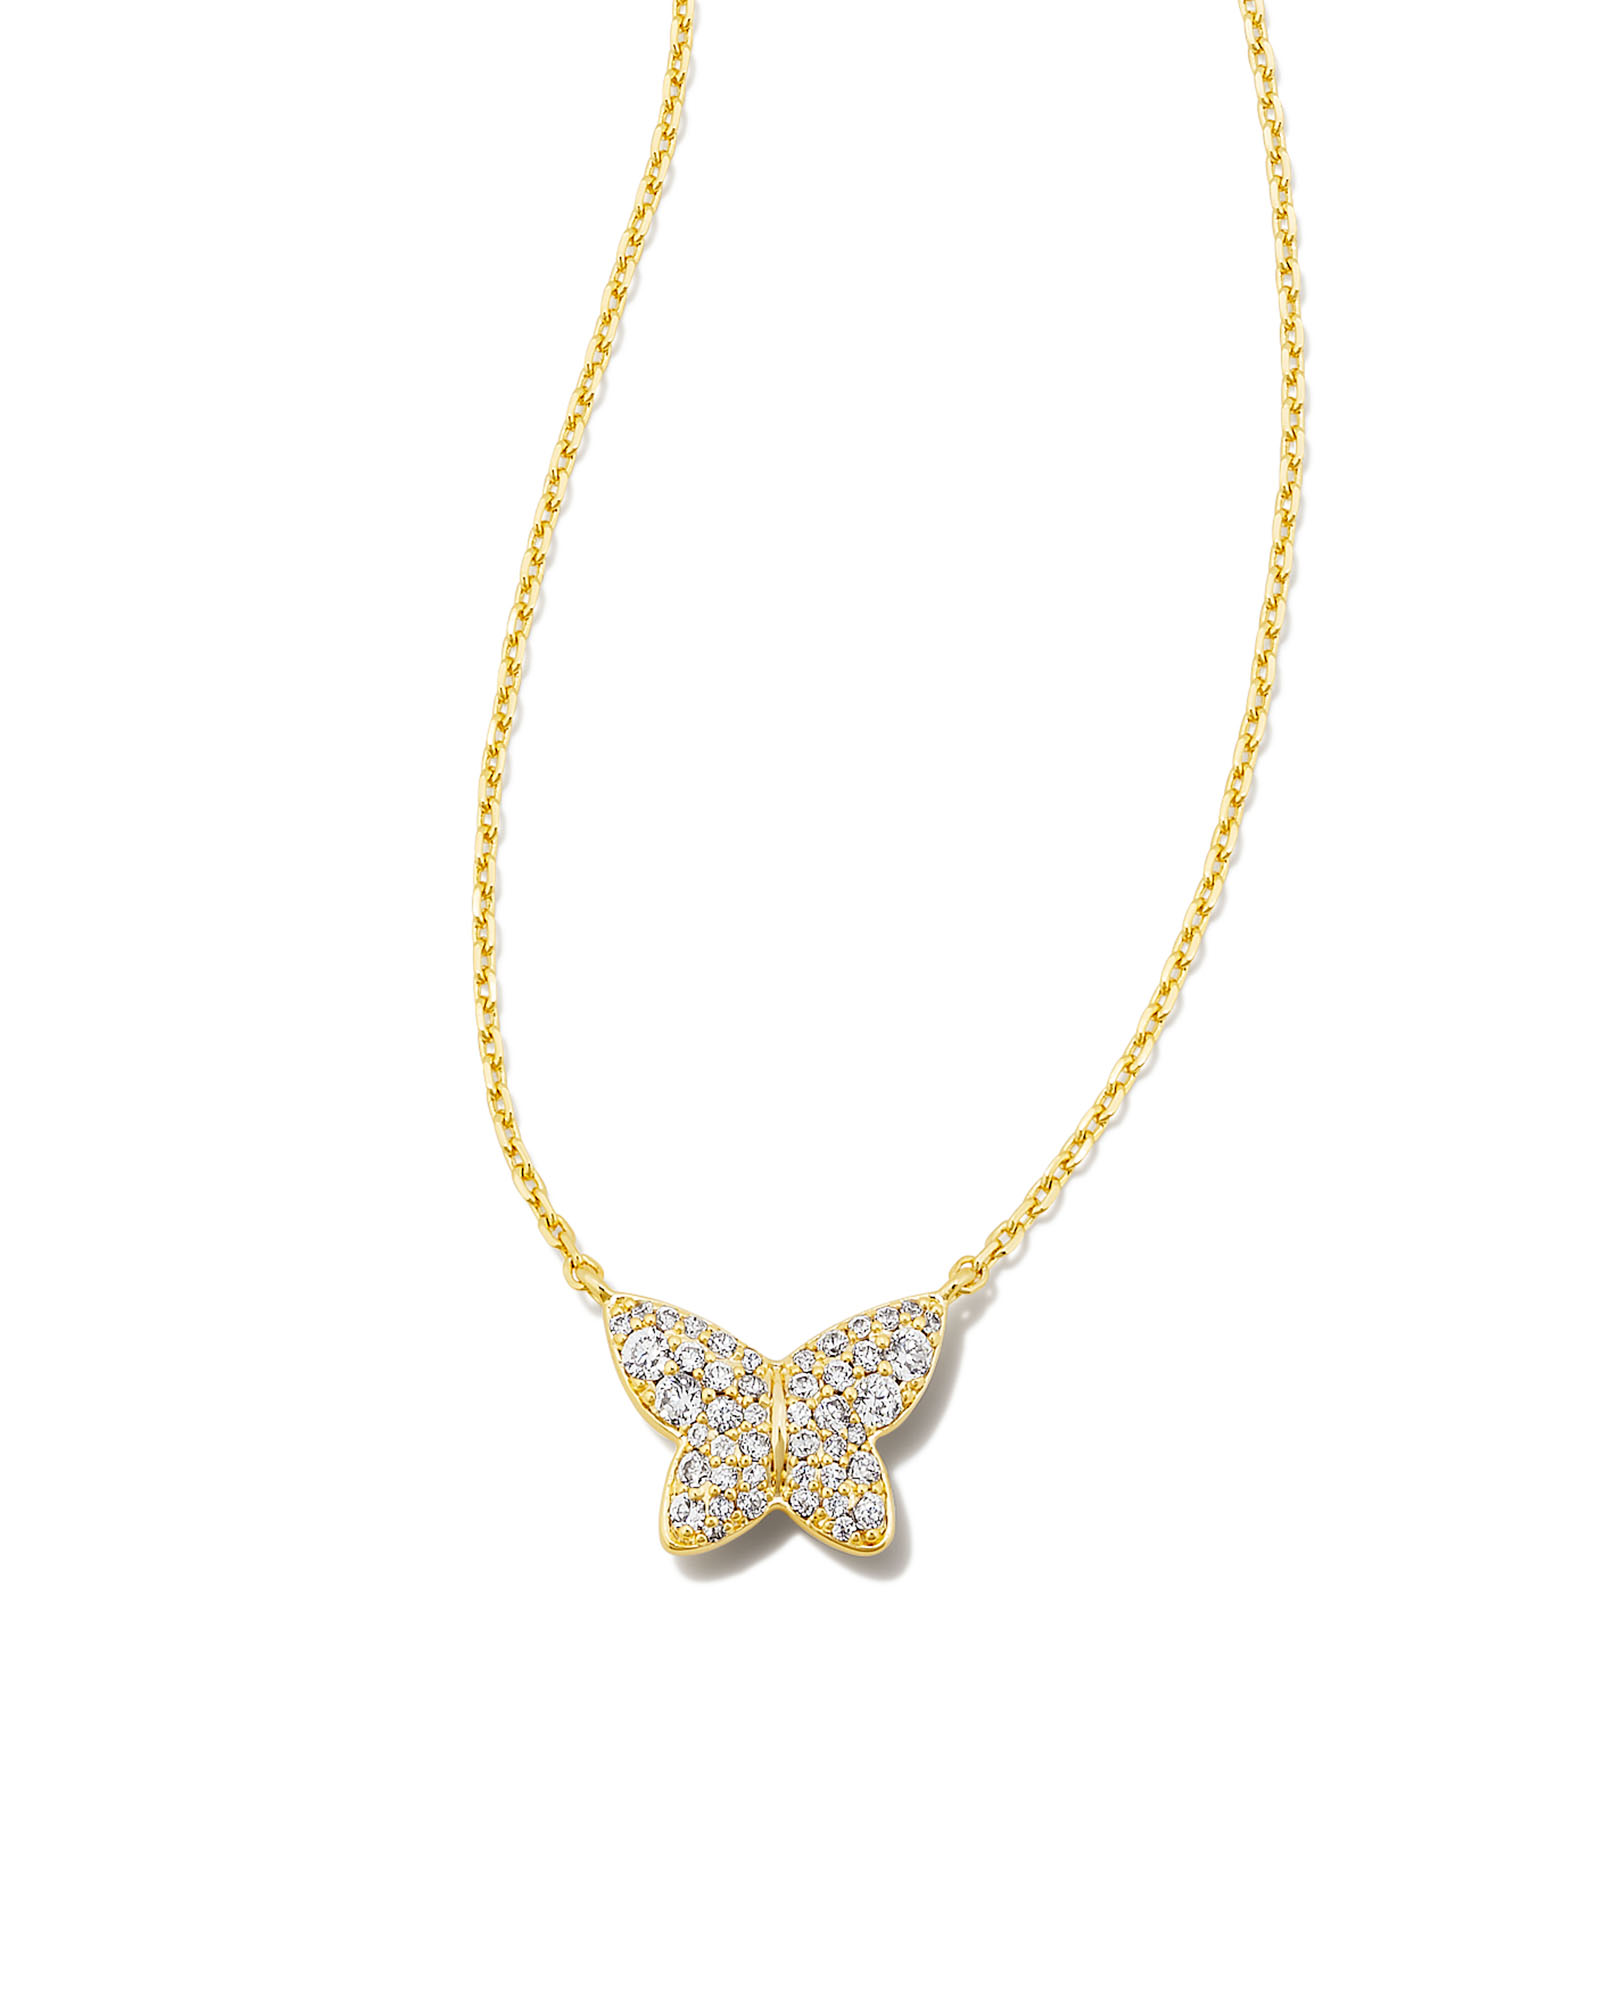 Kendra Scott Annie Chain Necklace in Gold | The Summit at Fritz Farm